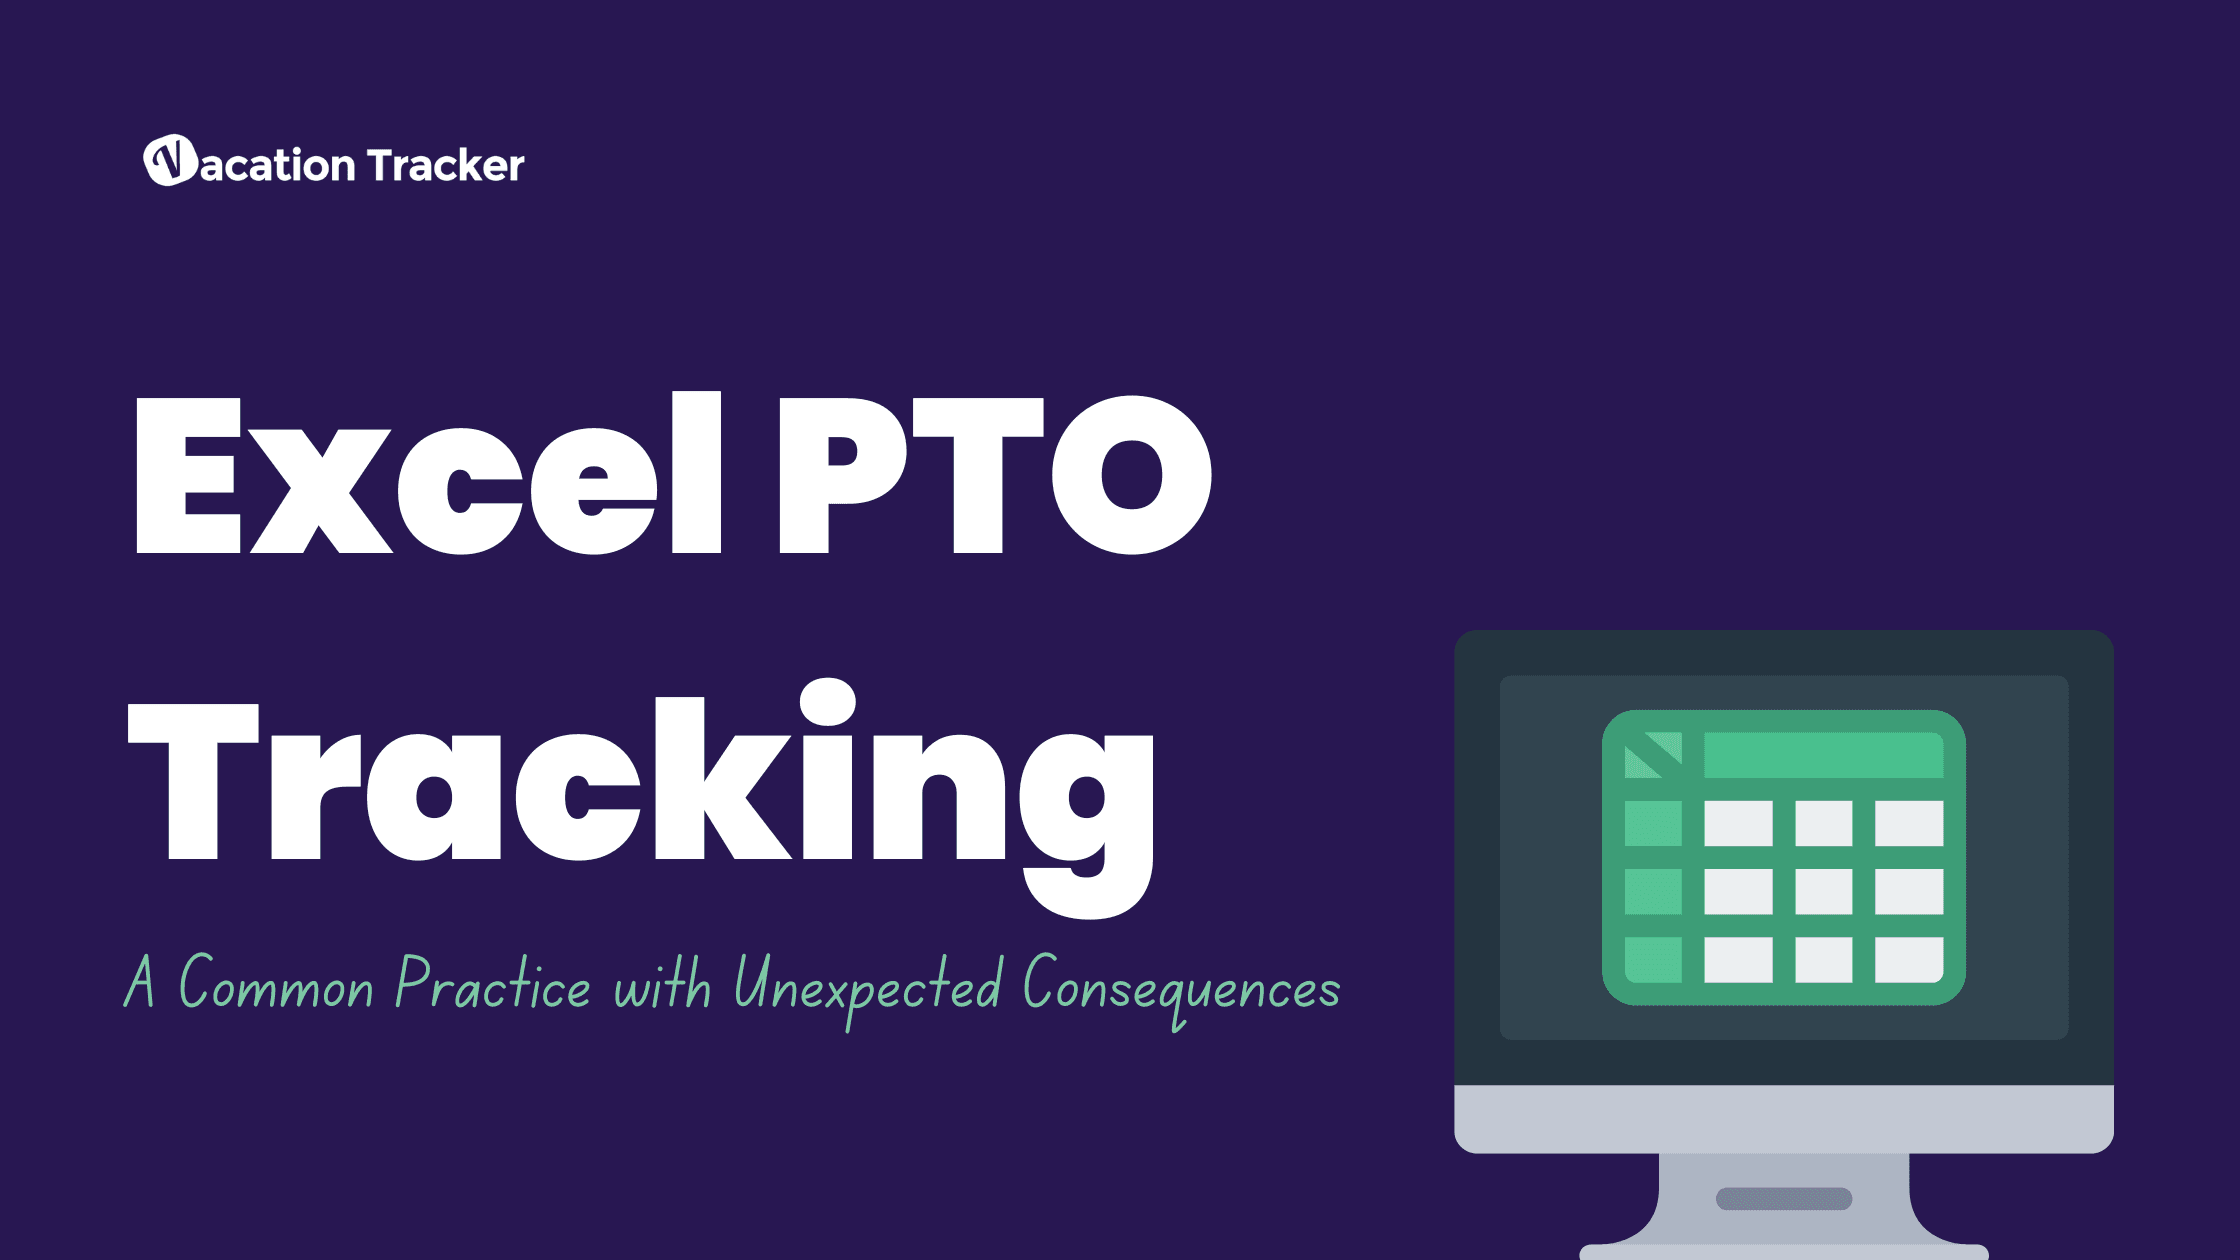 Excel PTO Tracking: A Common Practice with Unexpected Consequences